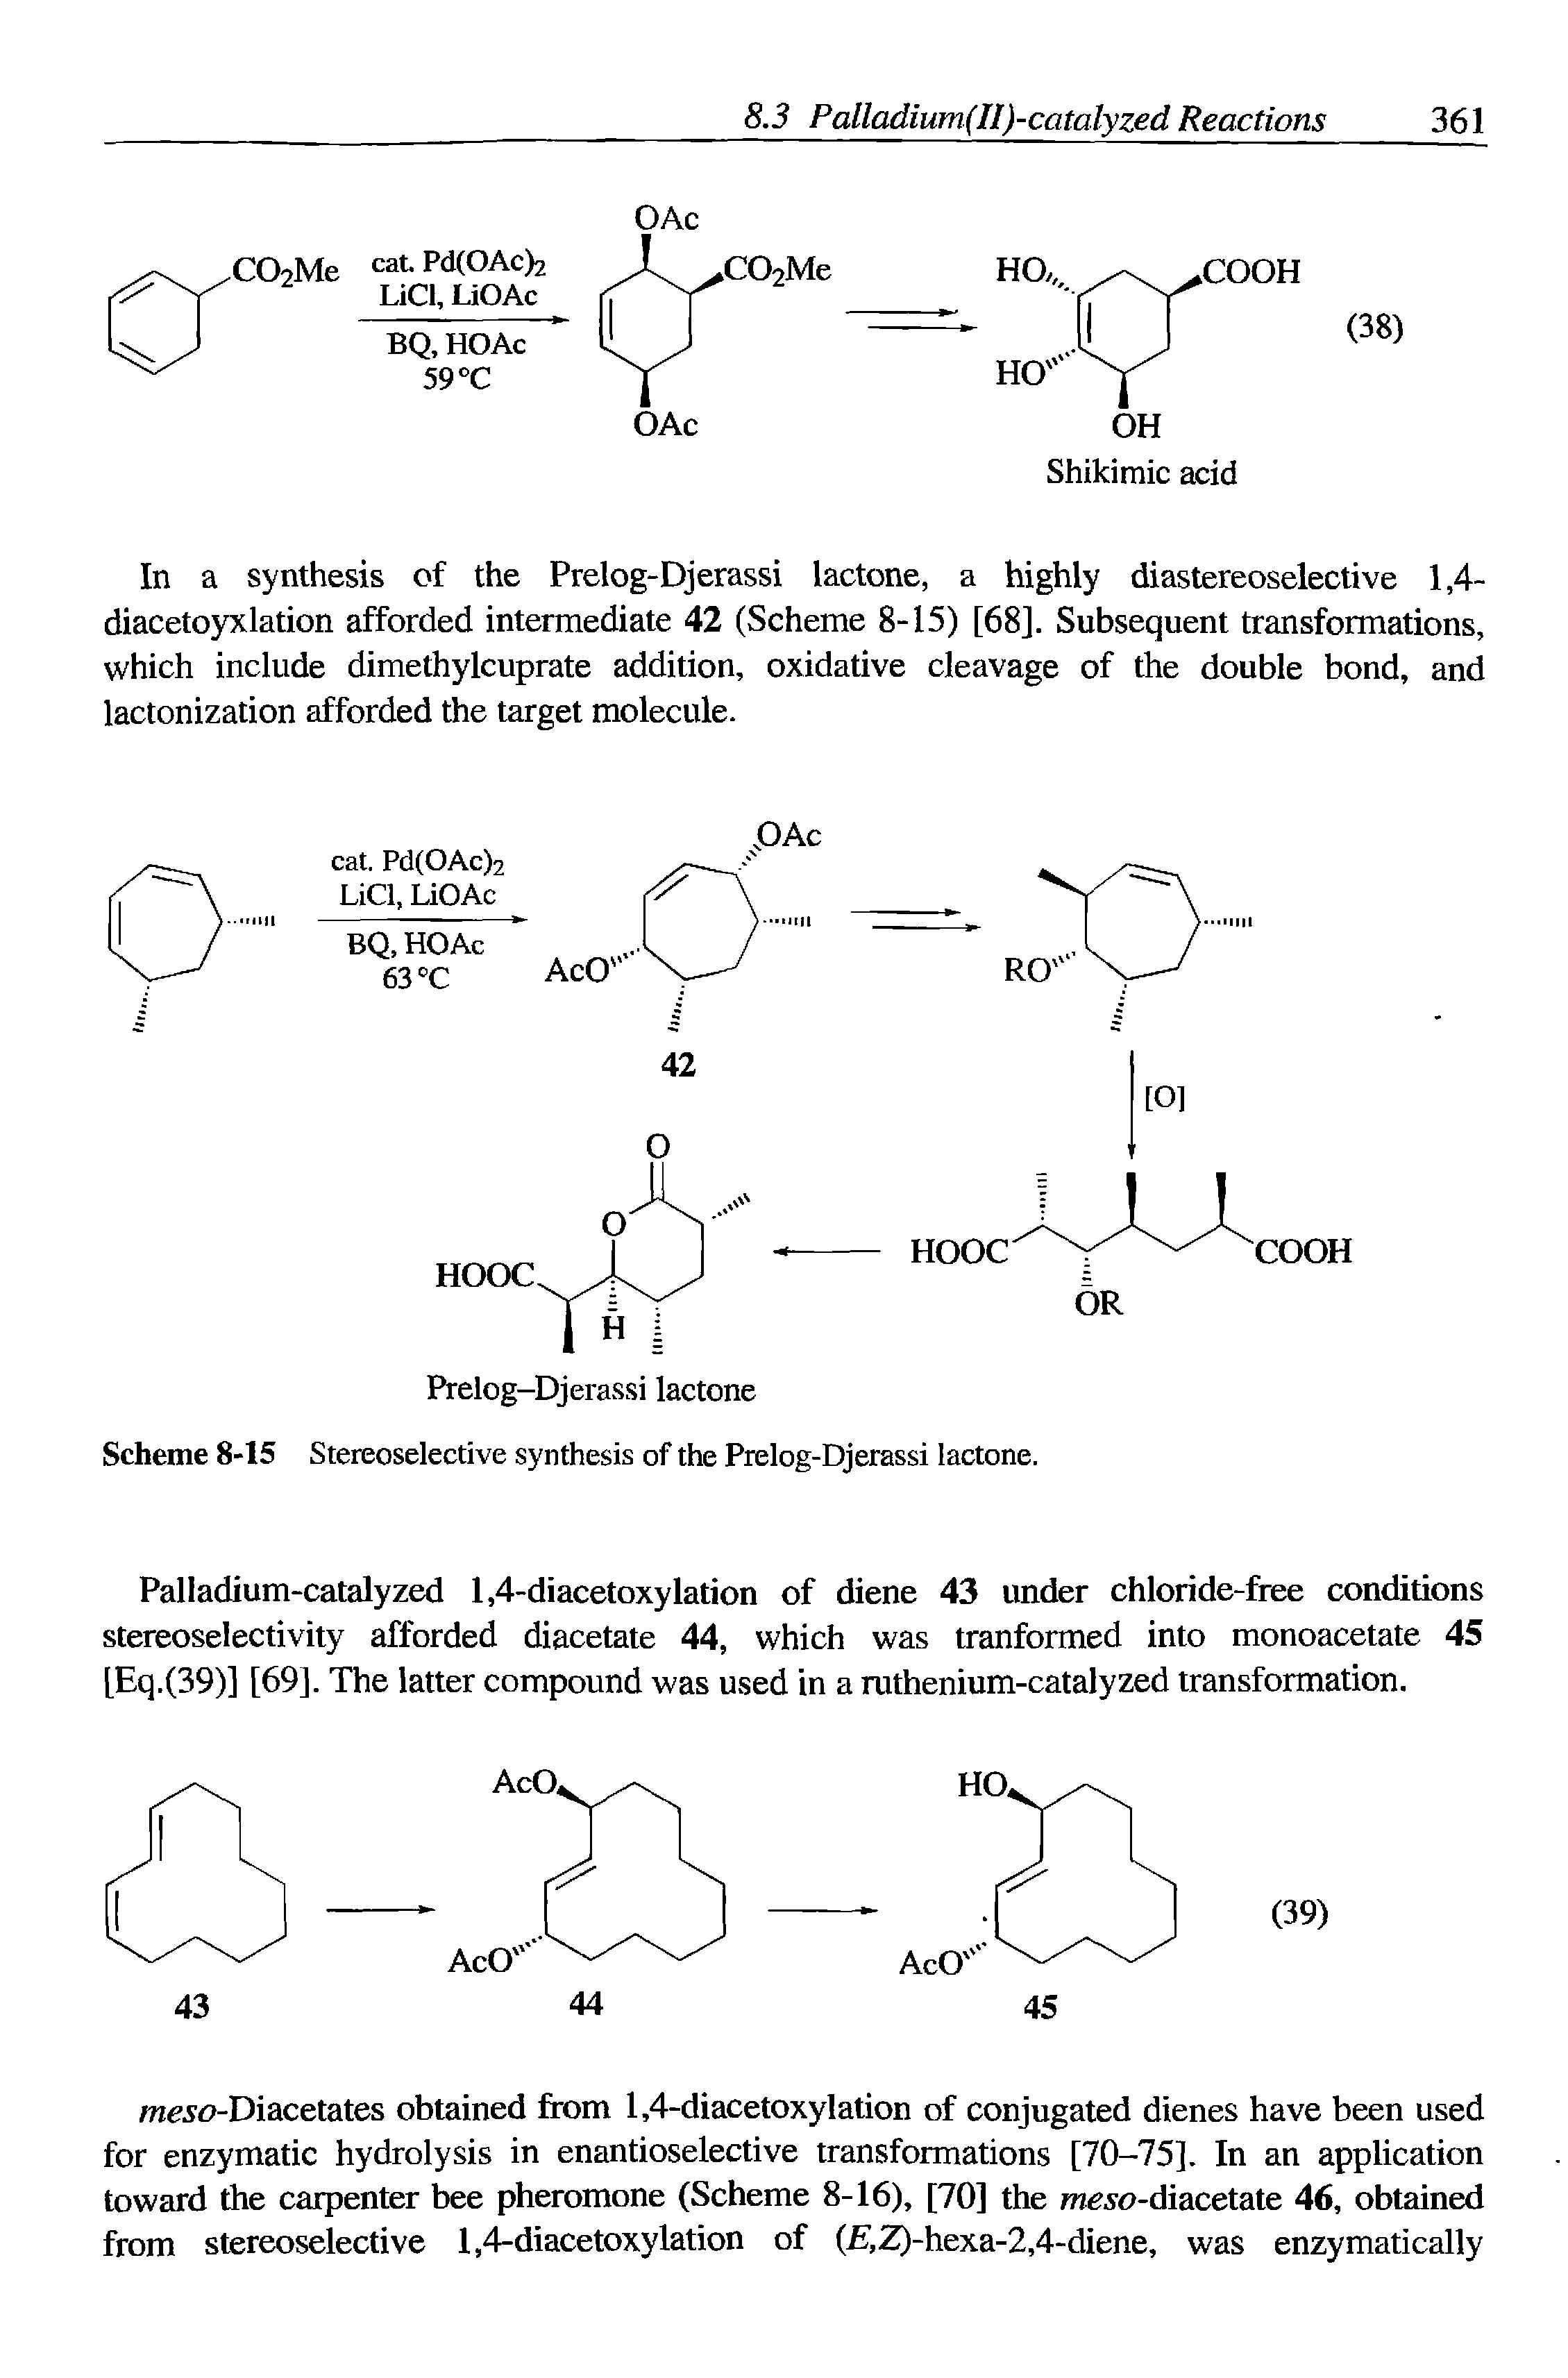 Scheme 8-15 Stereoselective synthesis of the Prelog-Djerassi lactone.